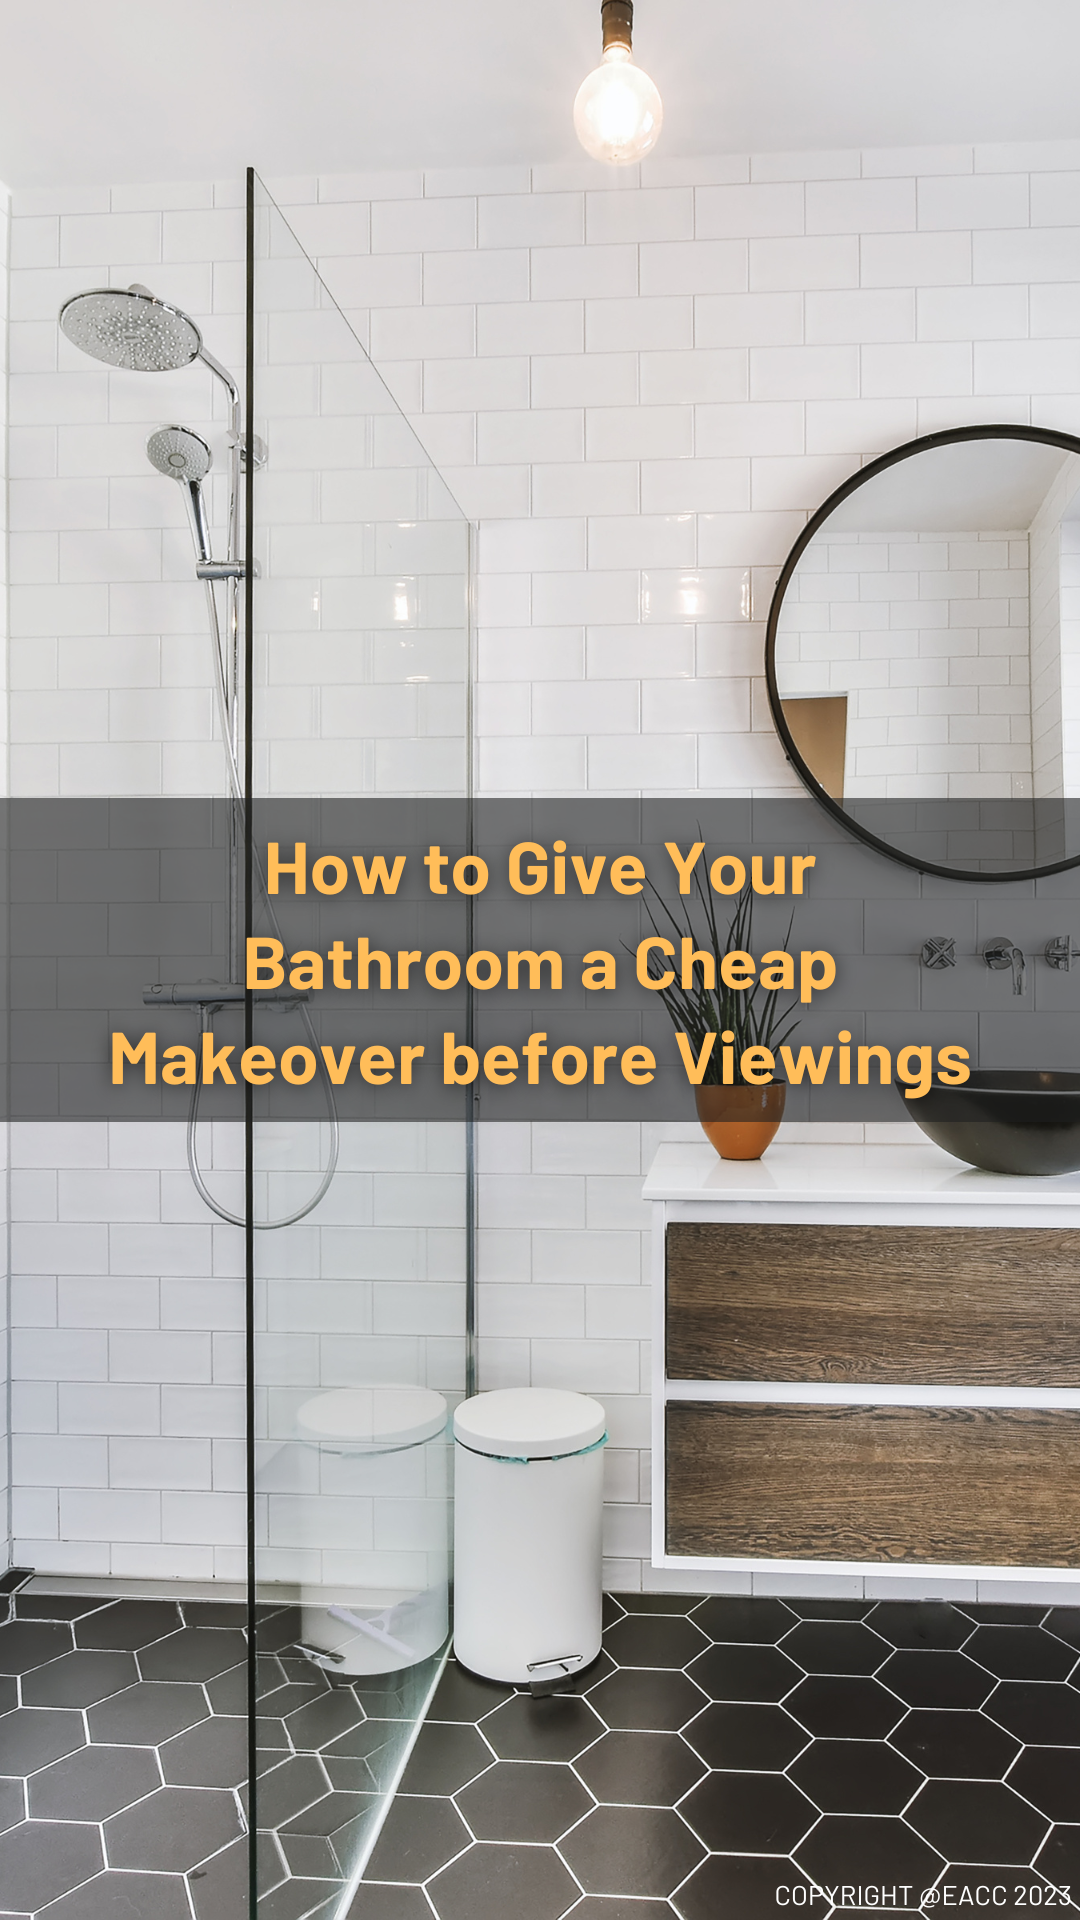 How to Give Your Brighton and Hove Bathroom a Cheap Makeover before Viewings